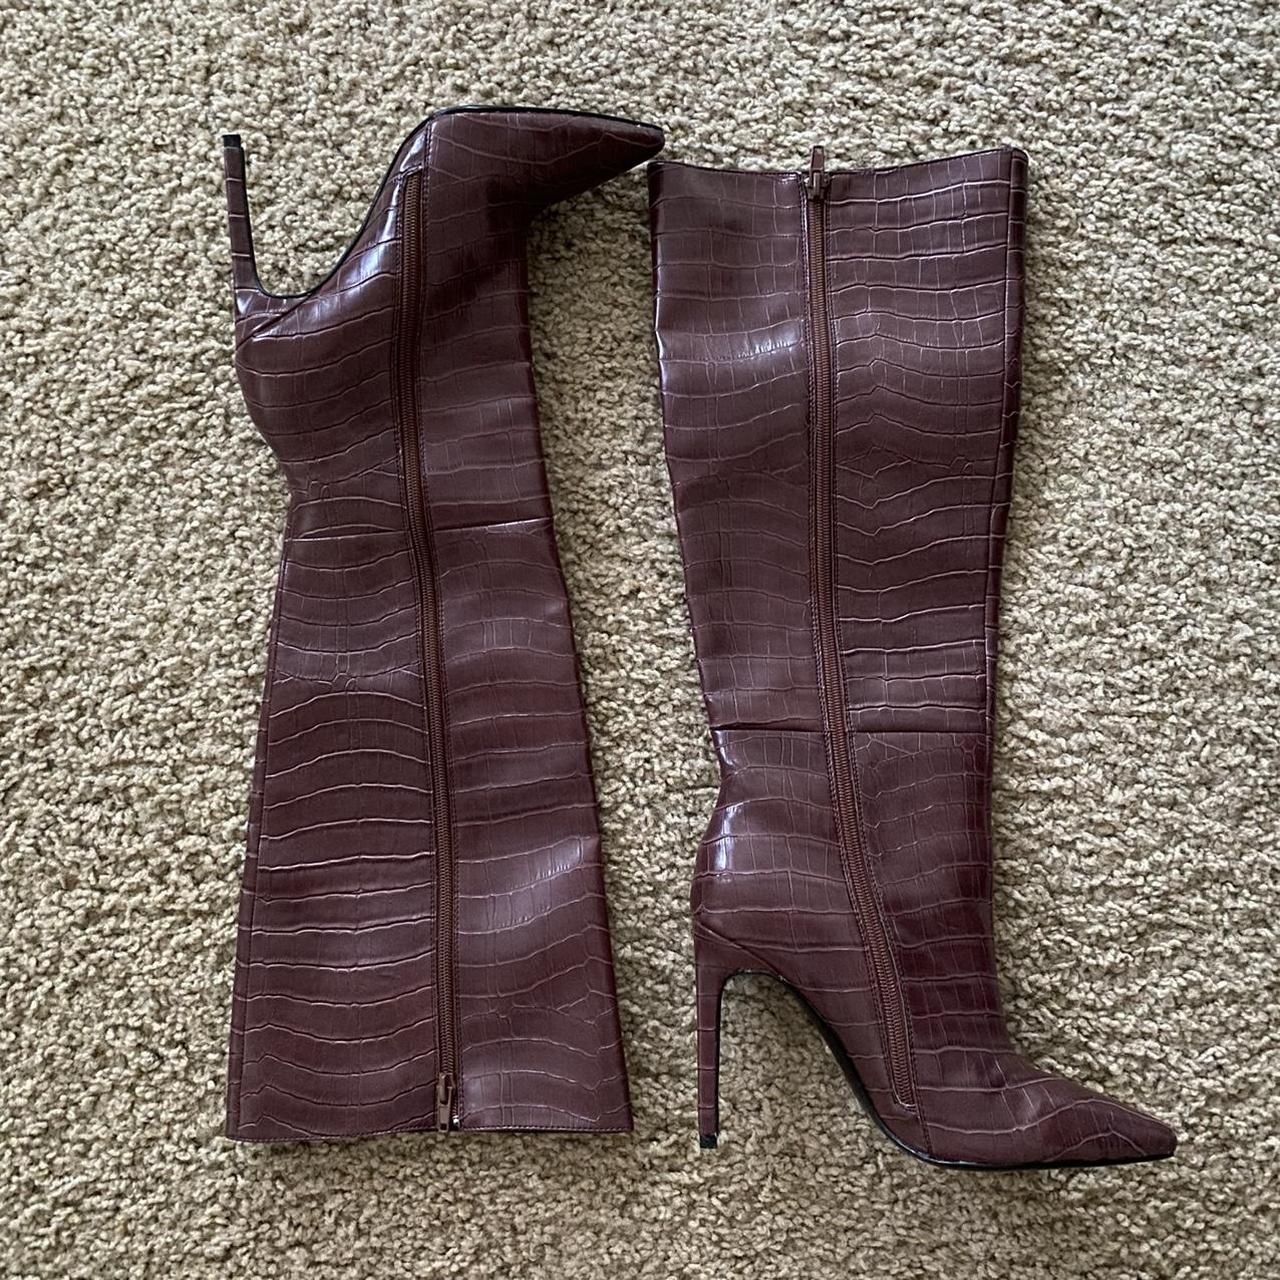 Reformation Women's Brown and Burgundy Boots | Depop